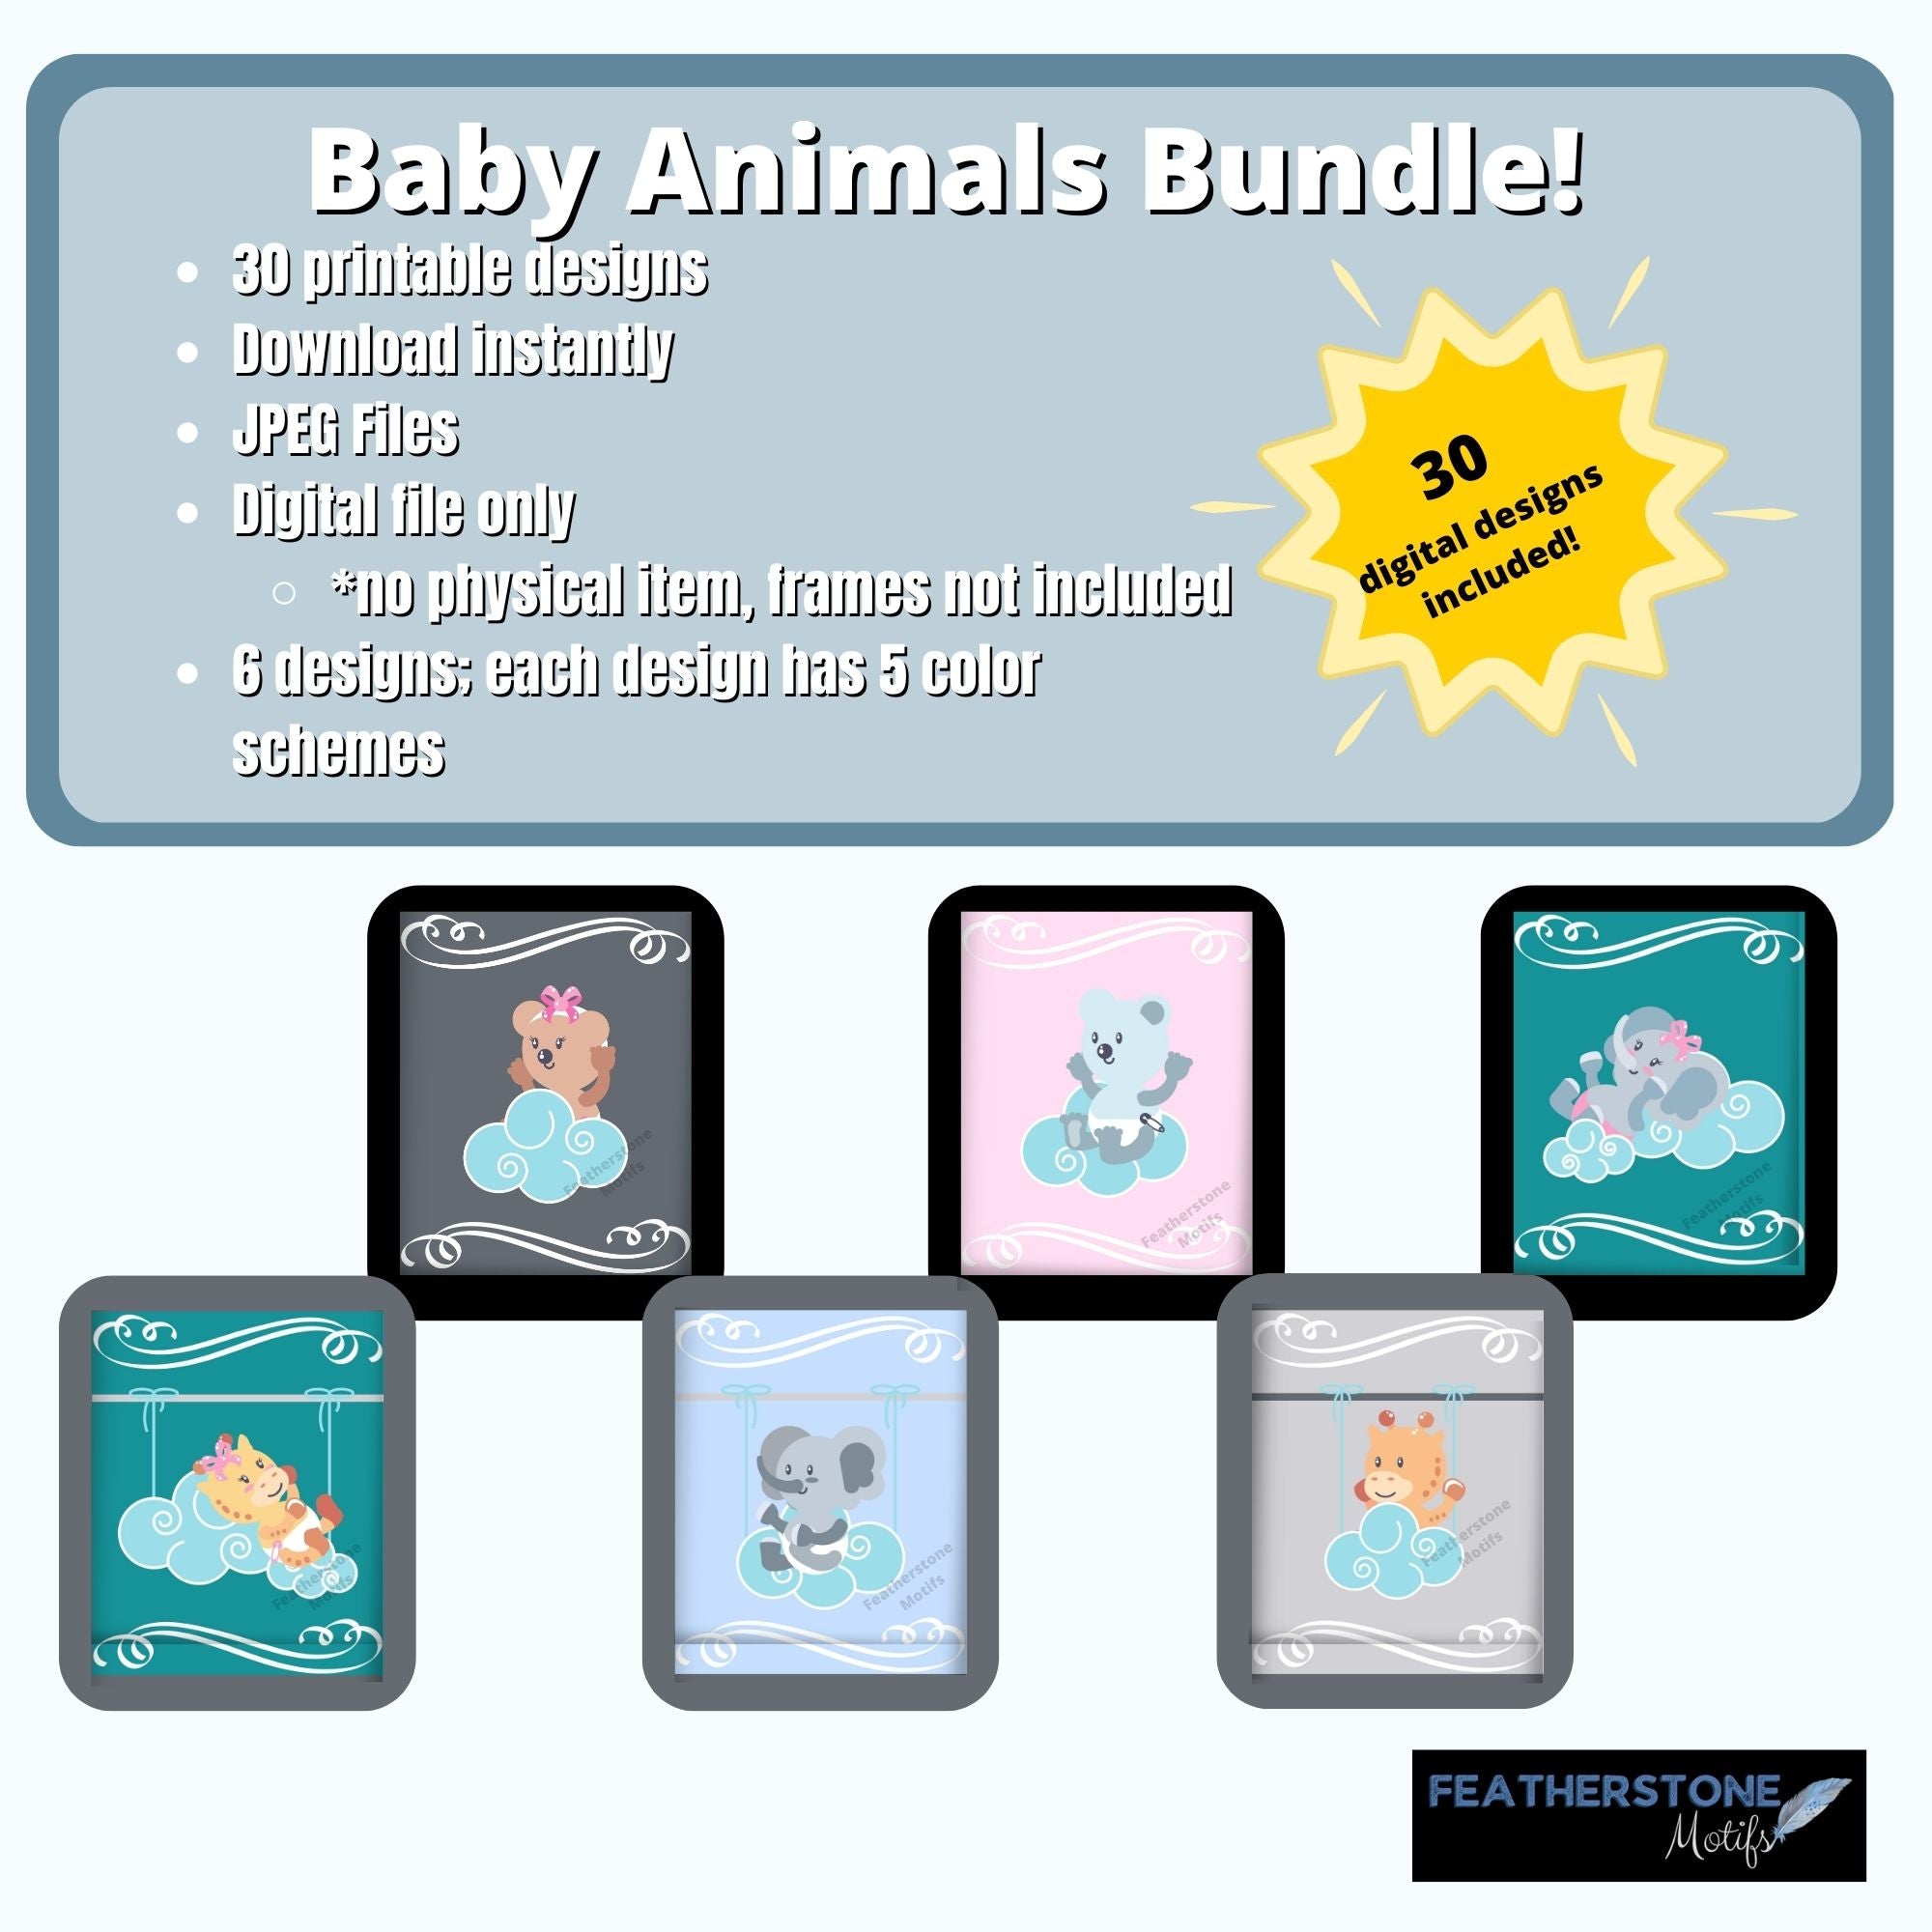 Adorable baby animals! This digital download will allow you to instantly download images of baby elephants, giraffes, and koalas.   